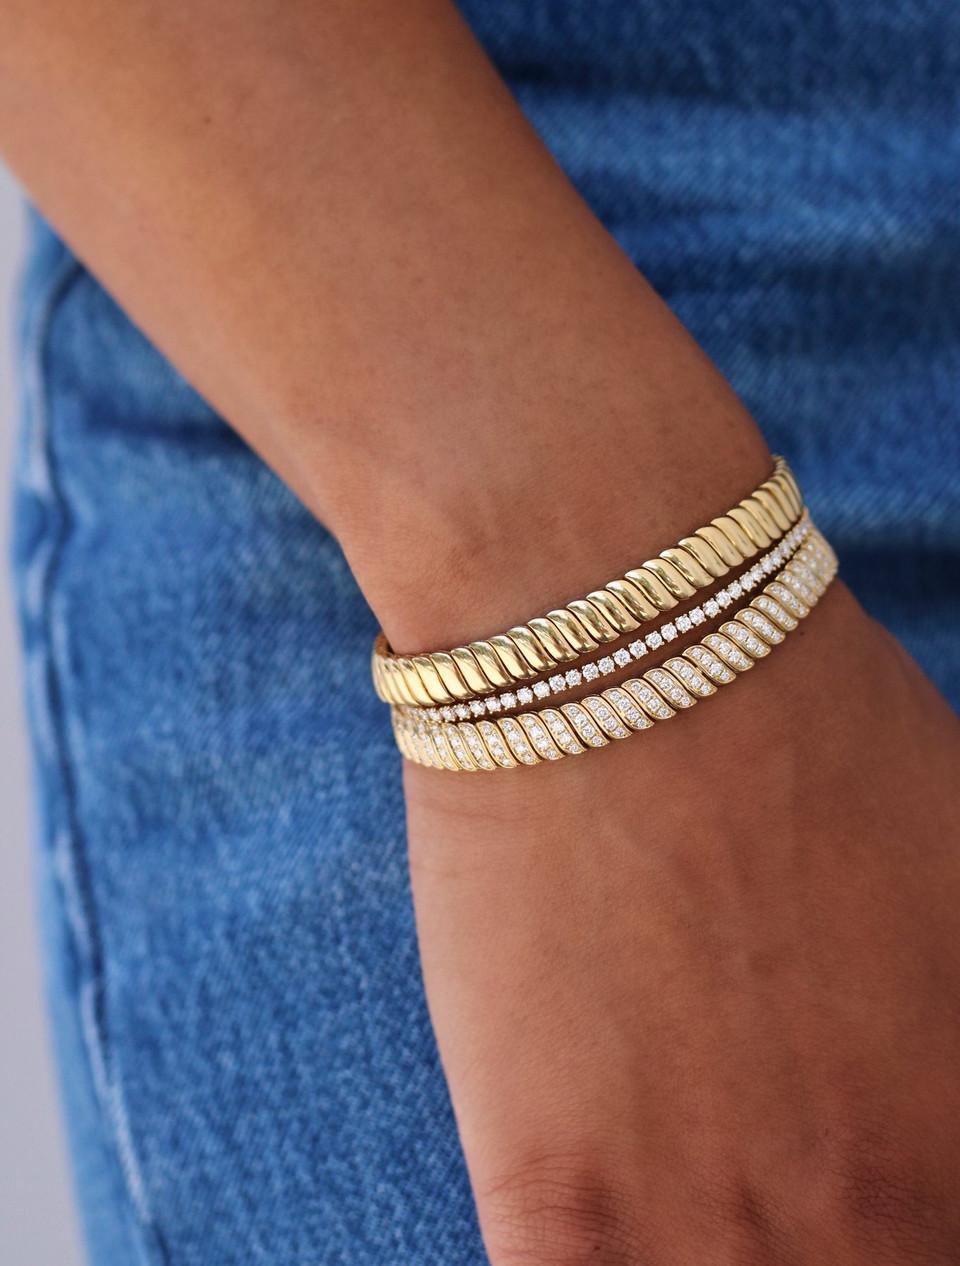 Simple yet elegant, this bracelet features interlocking curved links set in 18K gold and is highlighted by its light catching diamonds. The perfect wear alone or stacked piece for any occasion. Add to your collection today! 

Style: